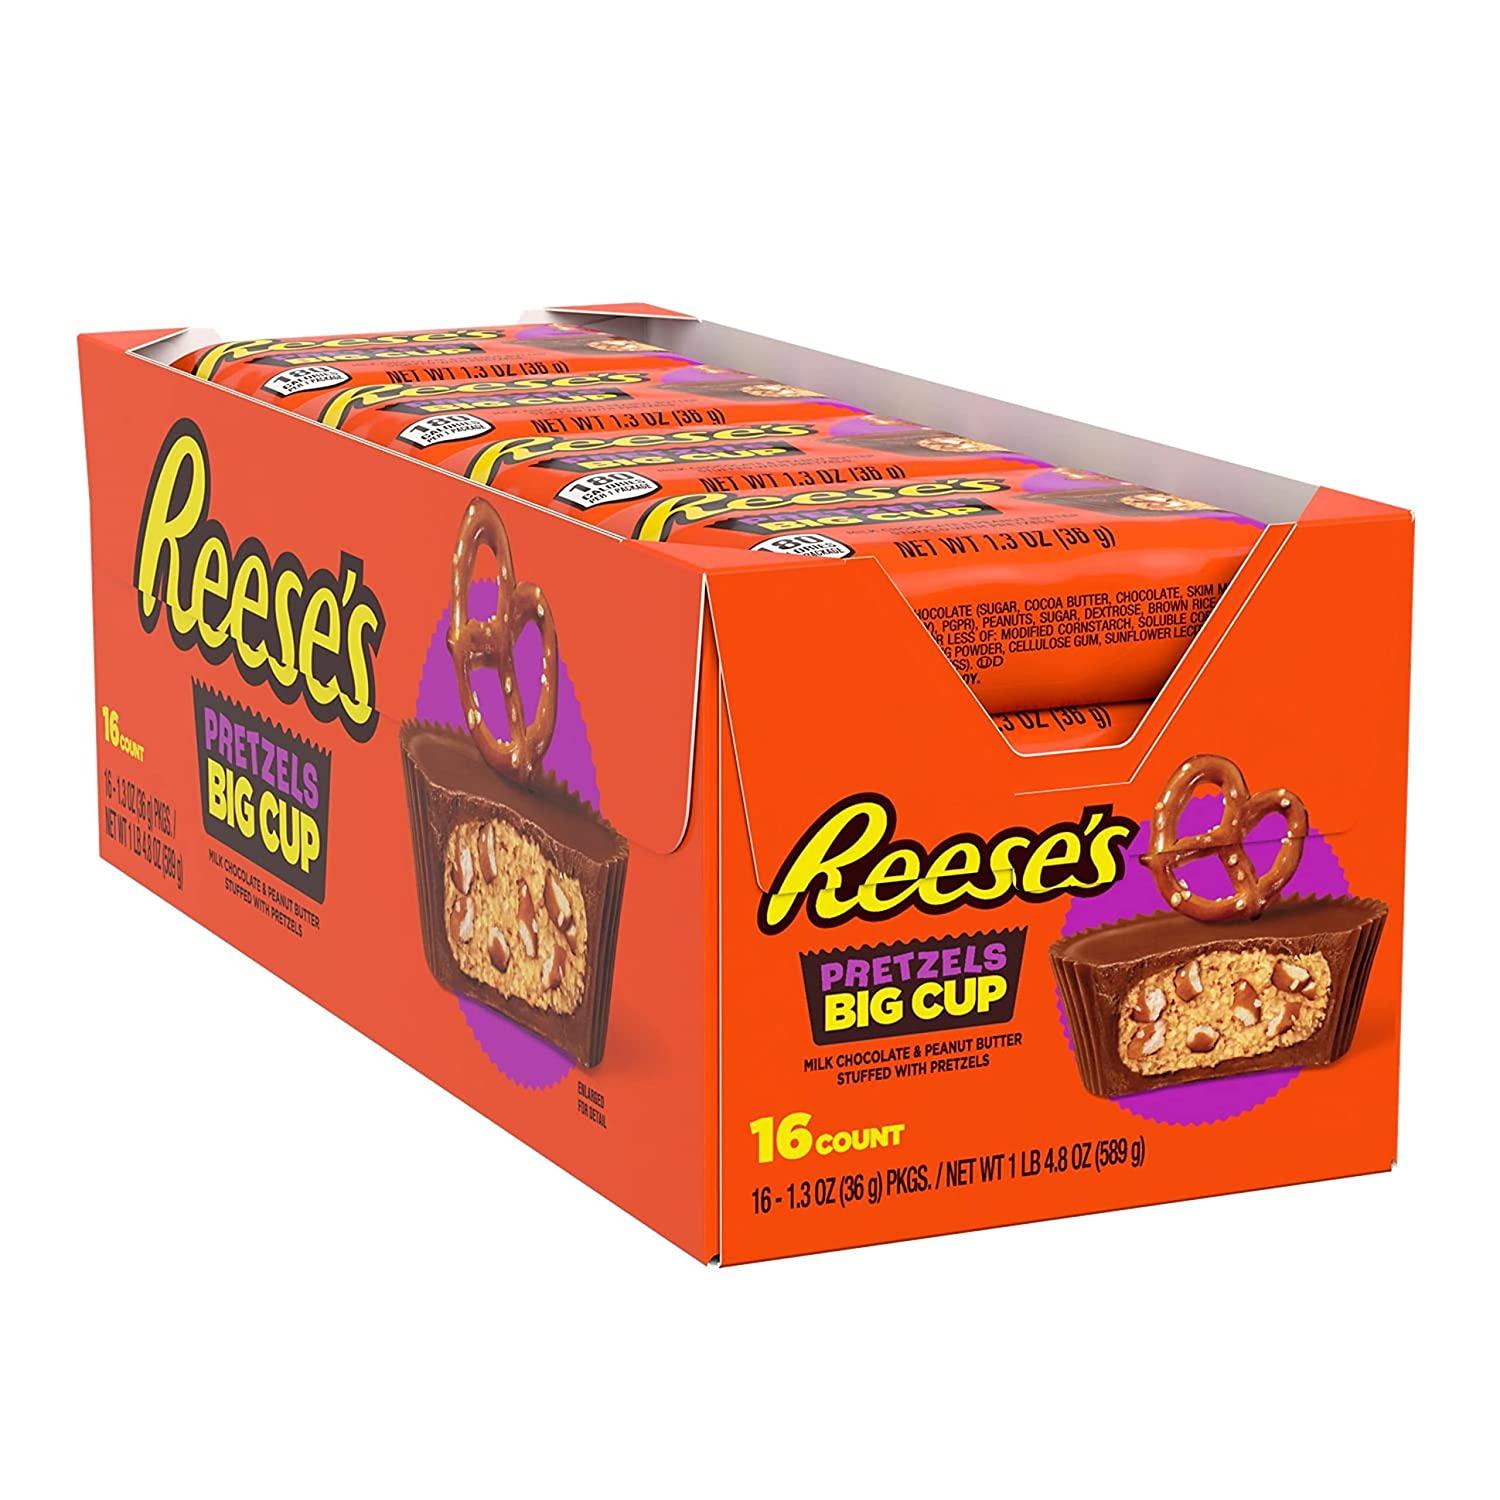 16 Reeses Milk Chocolate Peanut Butter Pretzel Big Cups for $10.84 Shipped